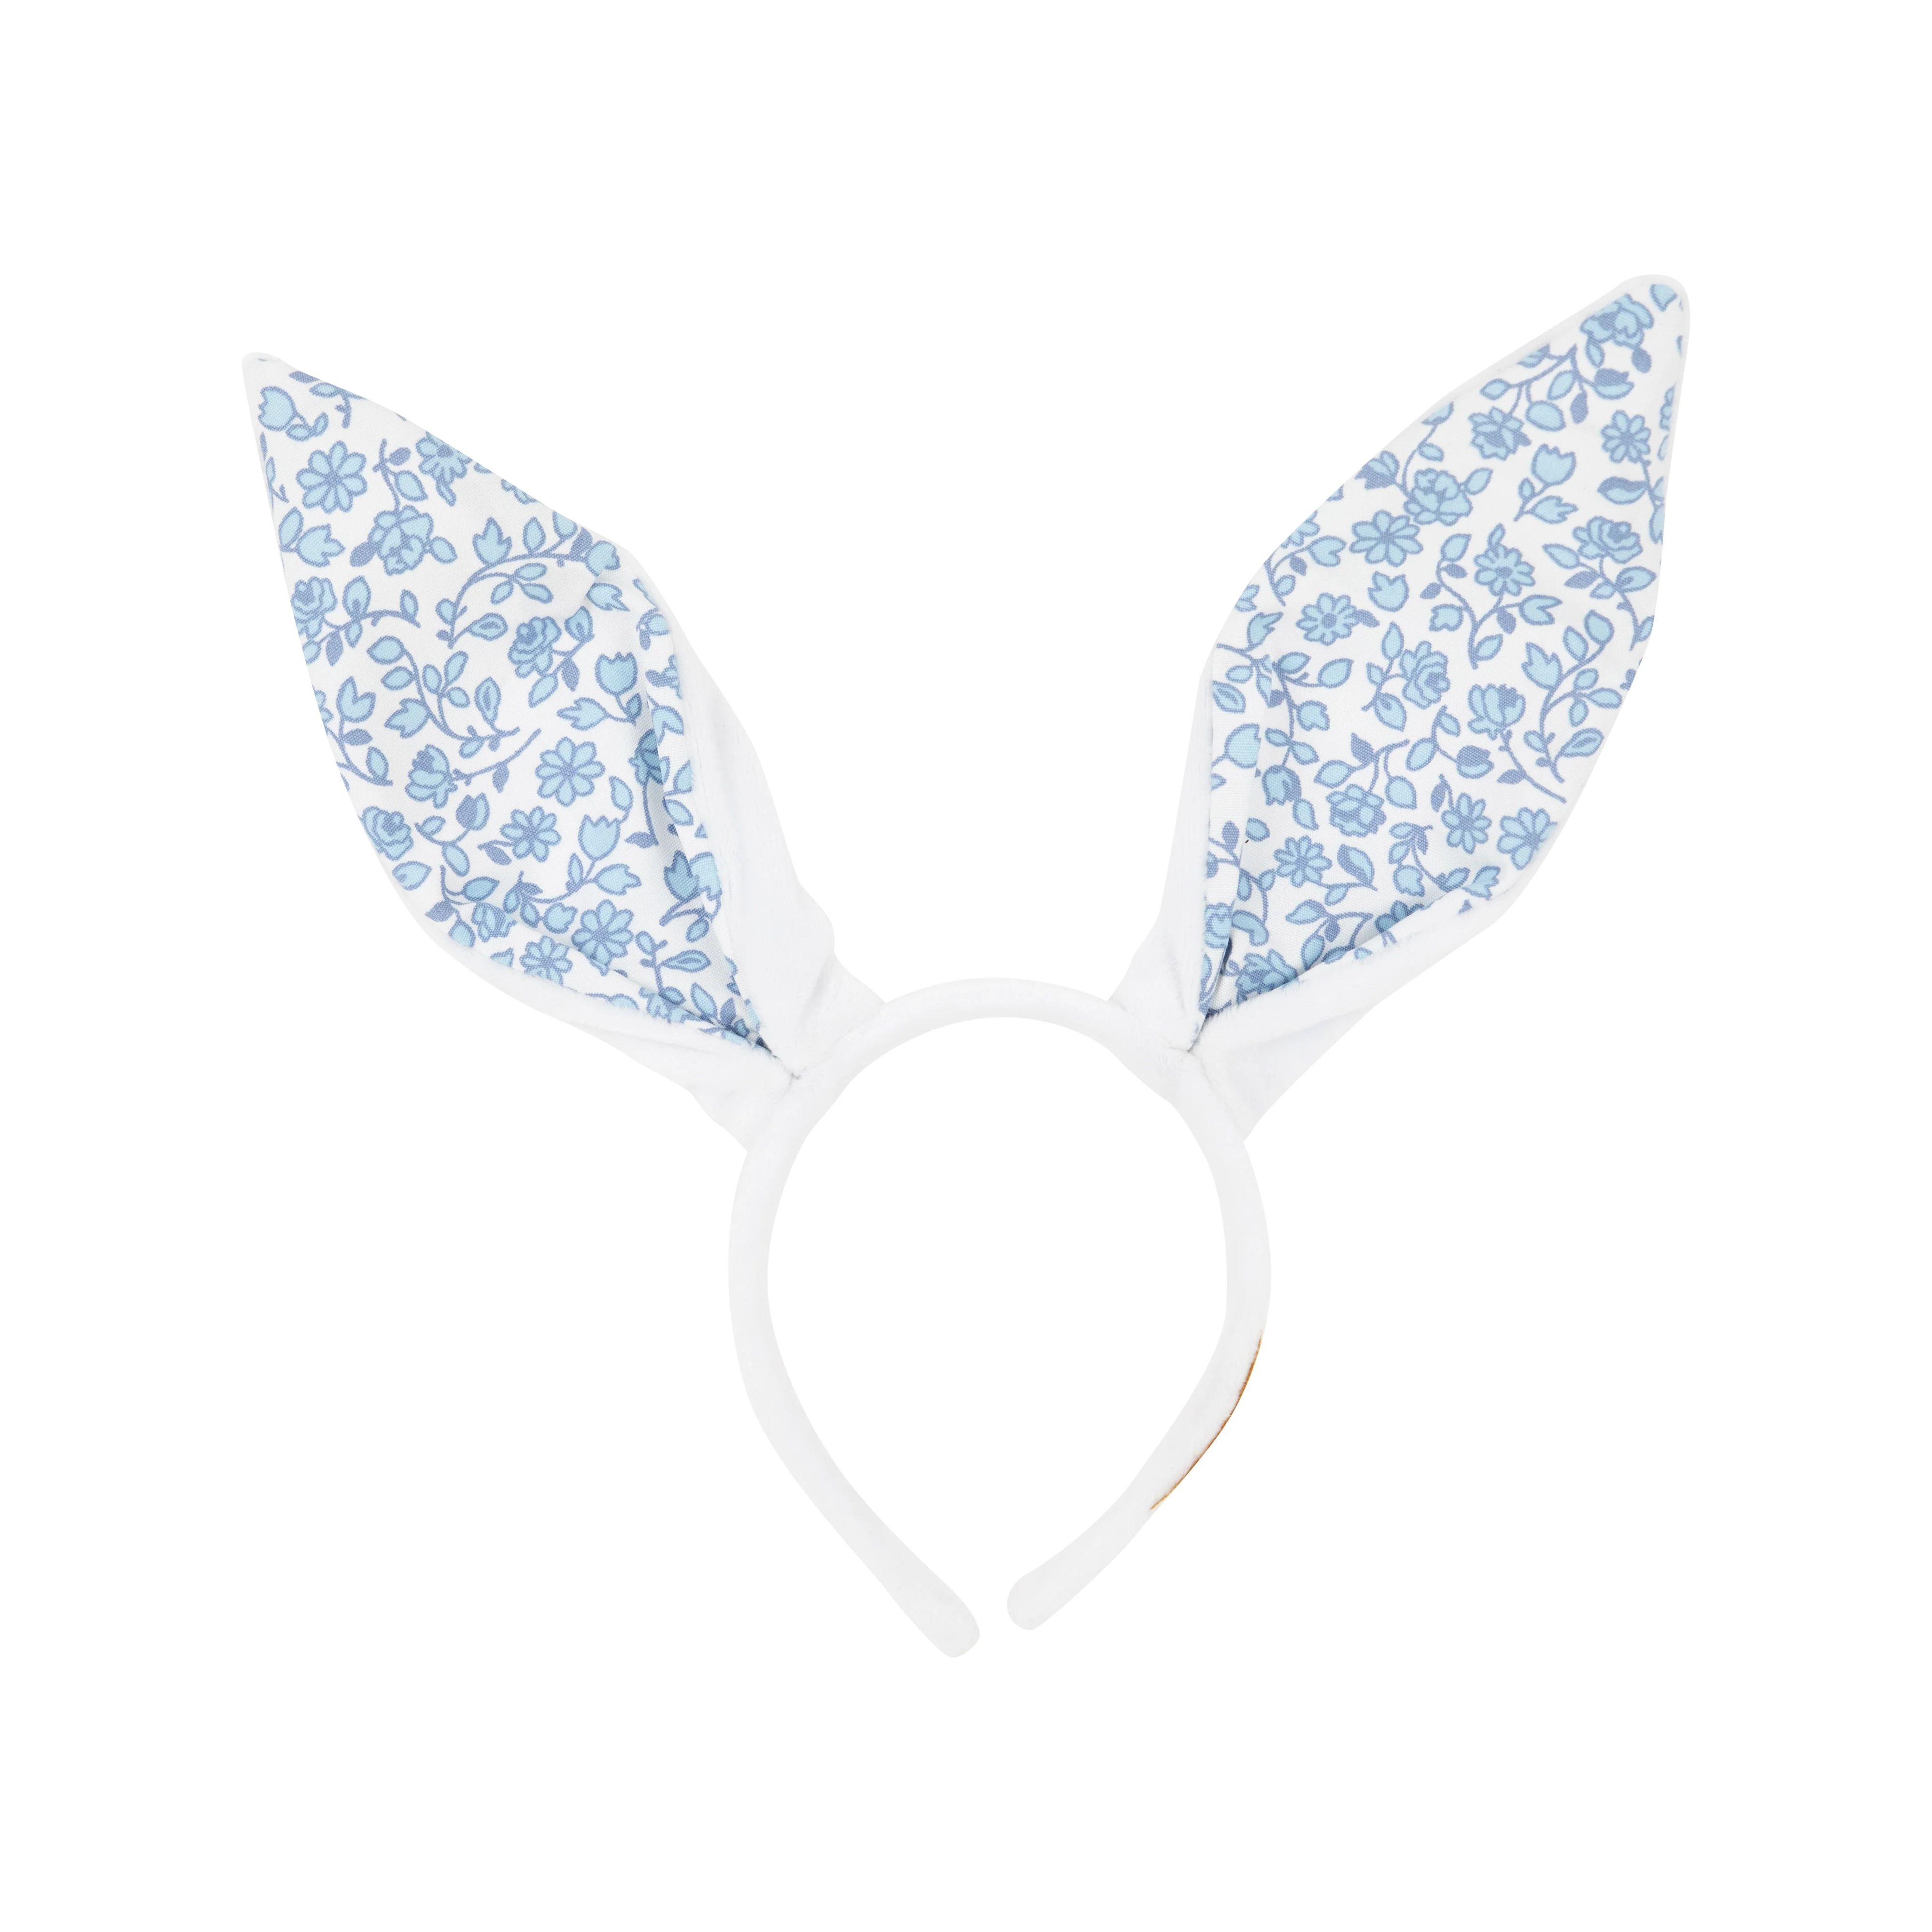 Wabbit Ears - Worth Avenue White with Greenbriar Garden | The Beaufort Bonnet Company